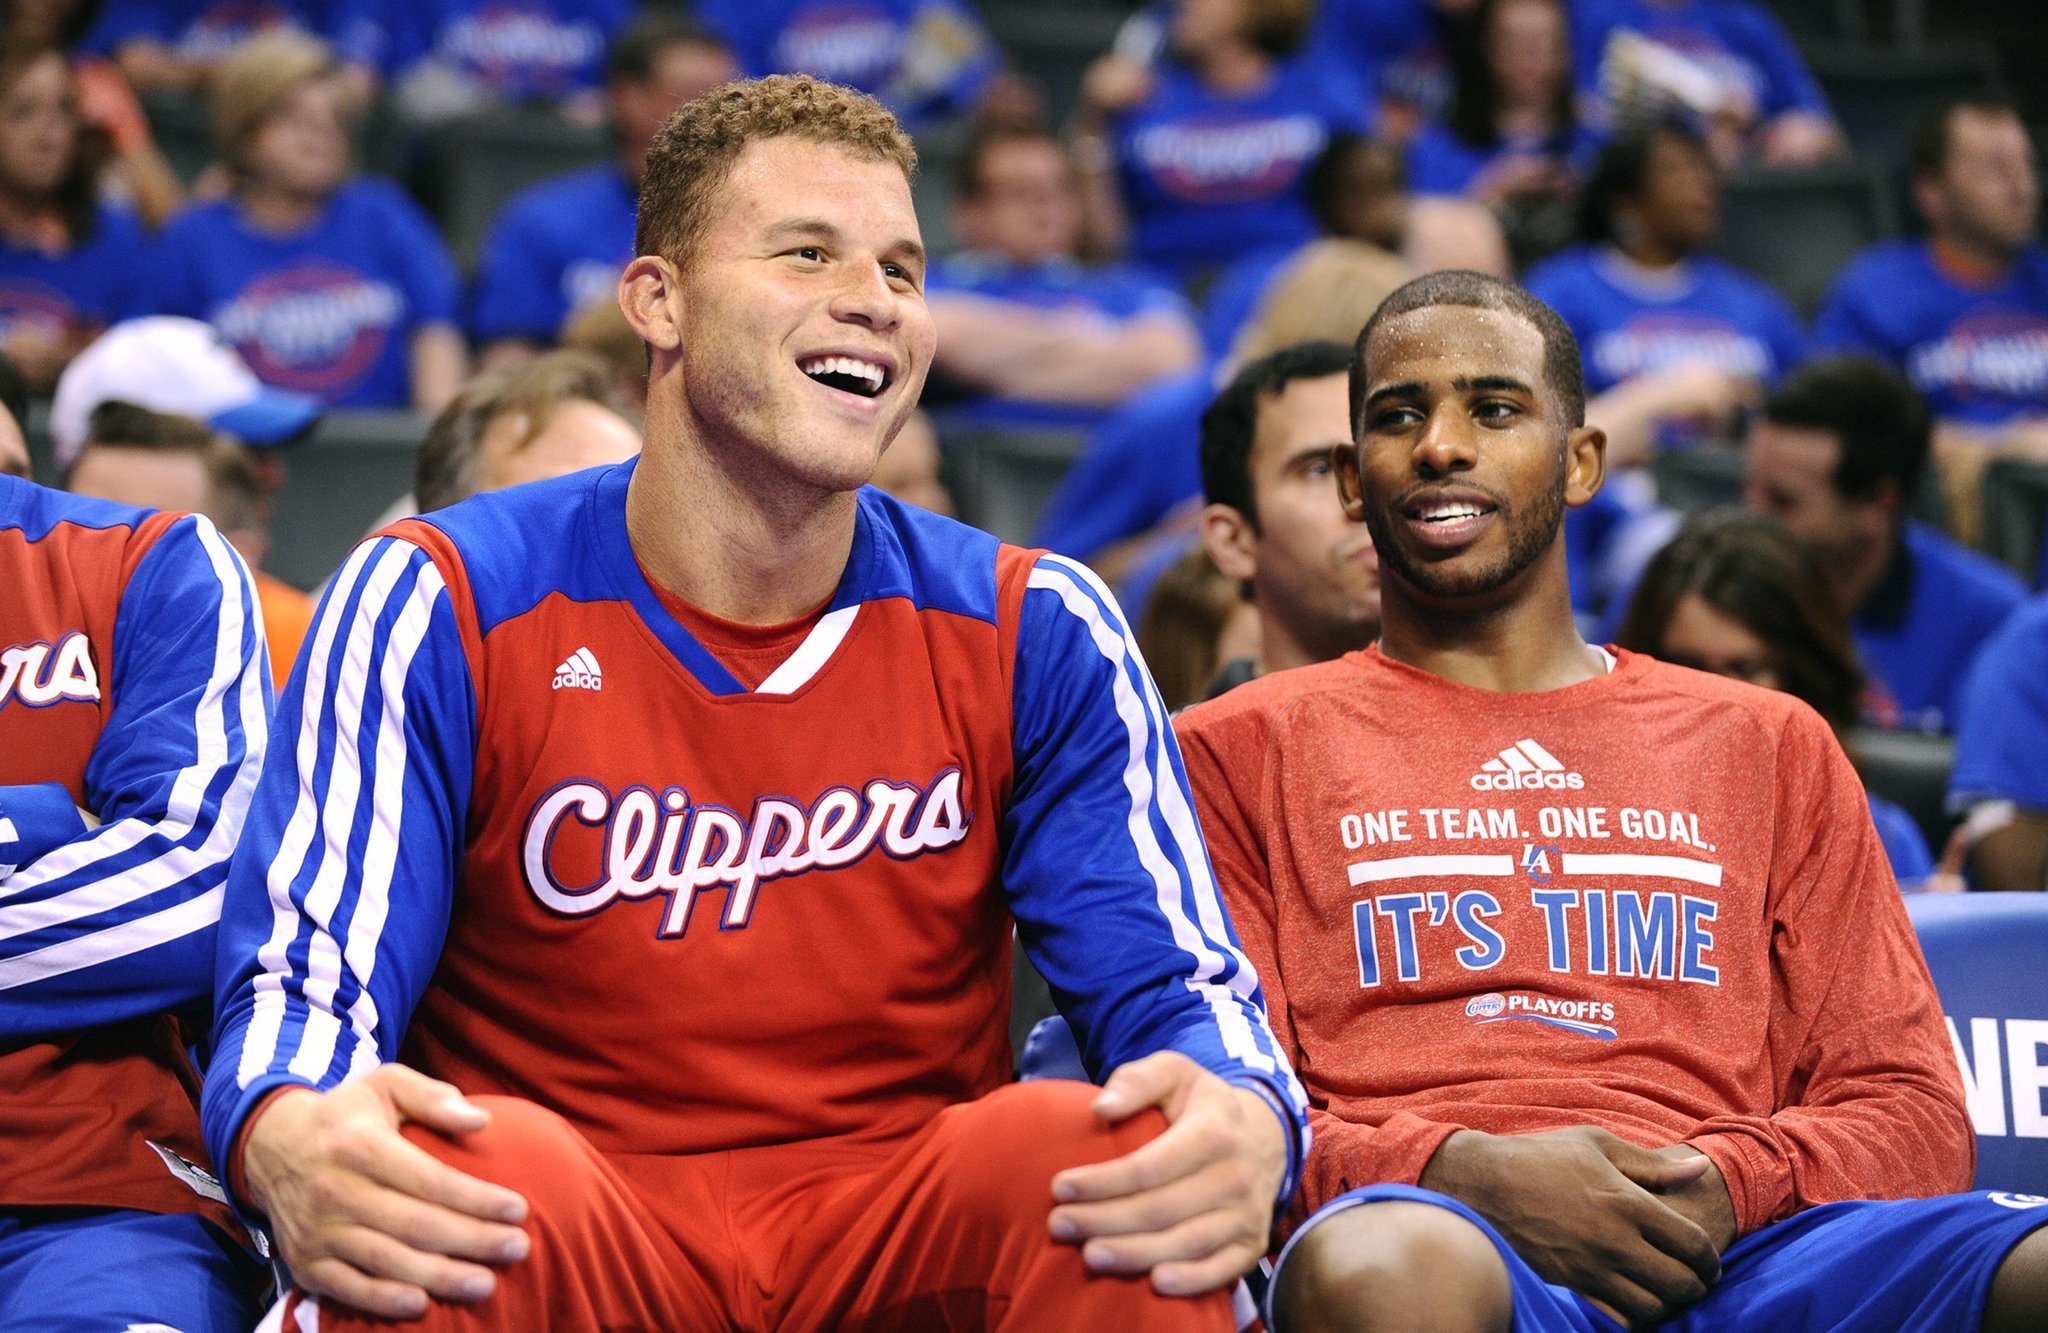 Clippers players recoil at Donald Sterling's claim they love him - Daily Press2048 x 1333